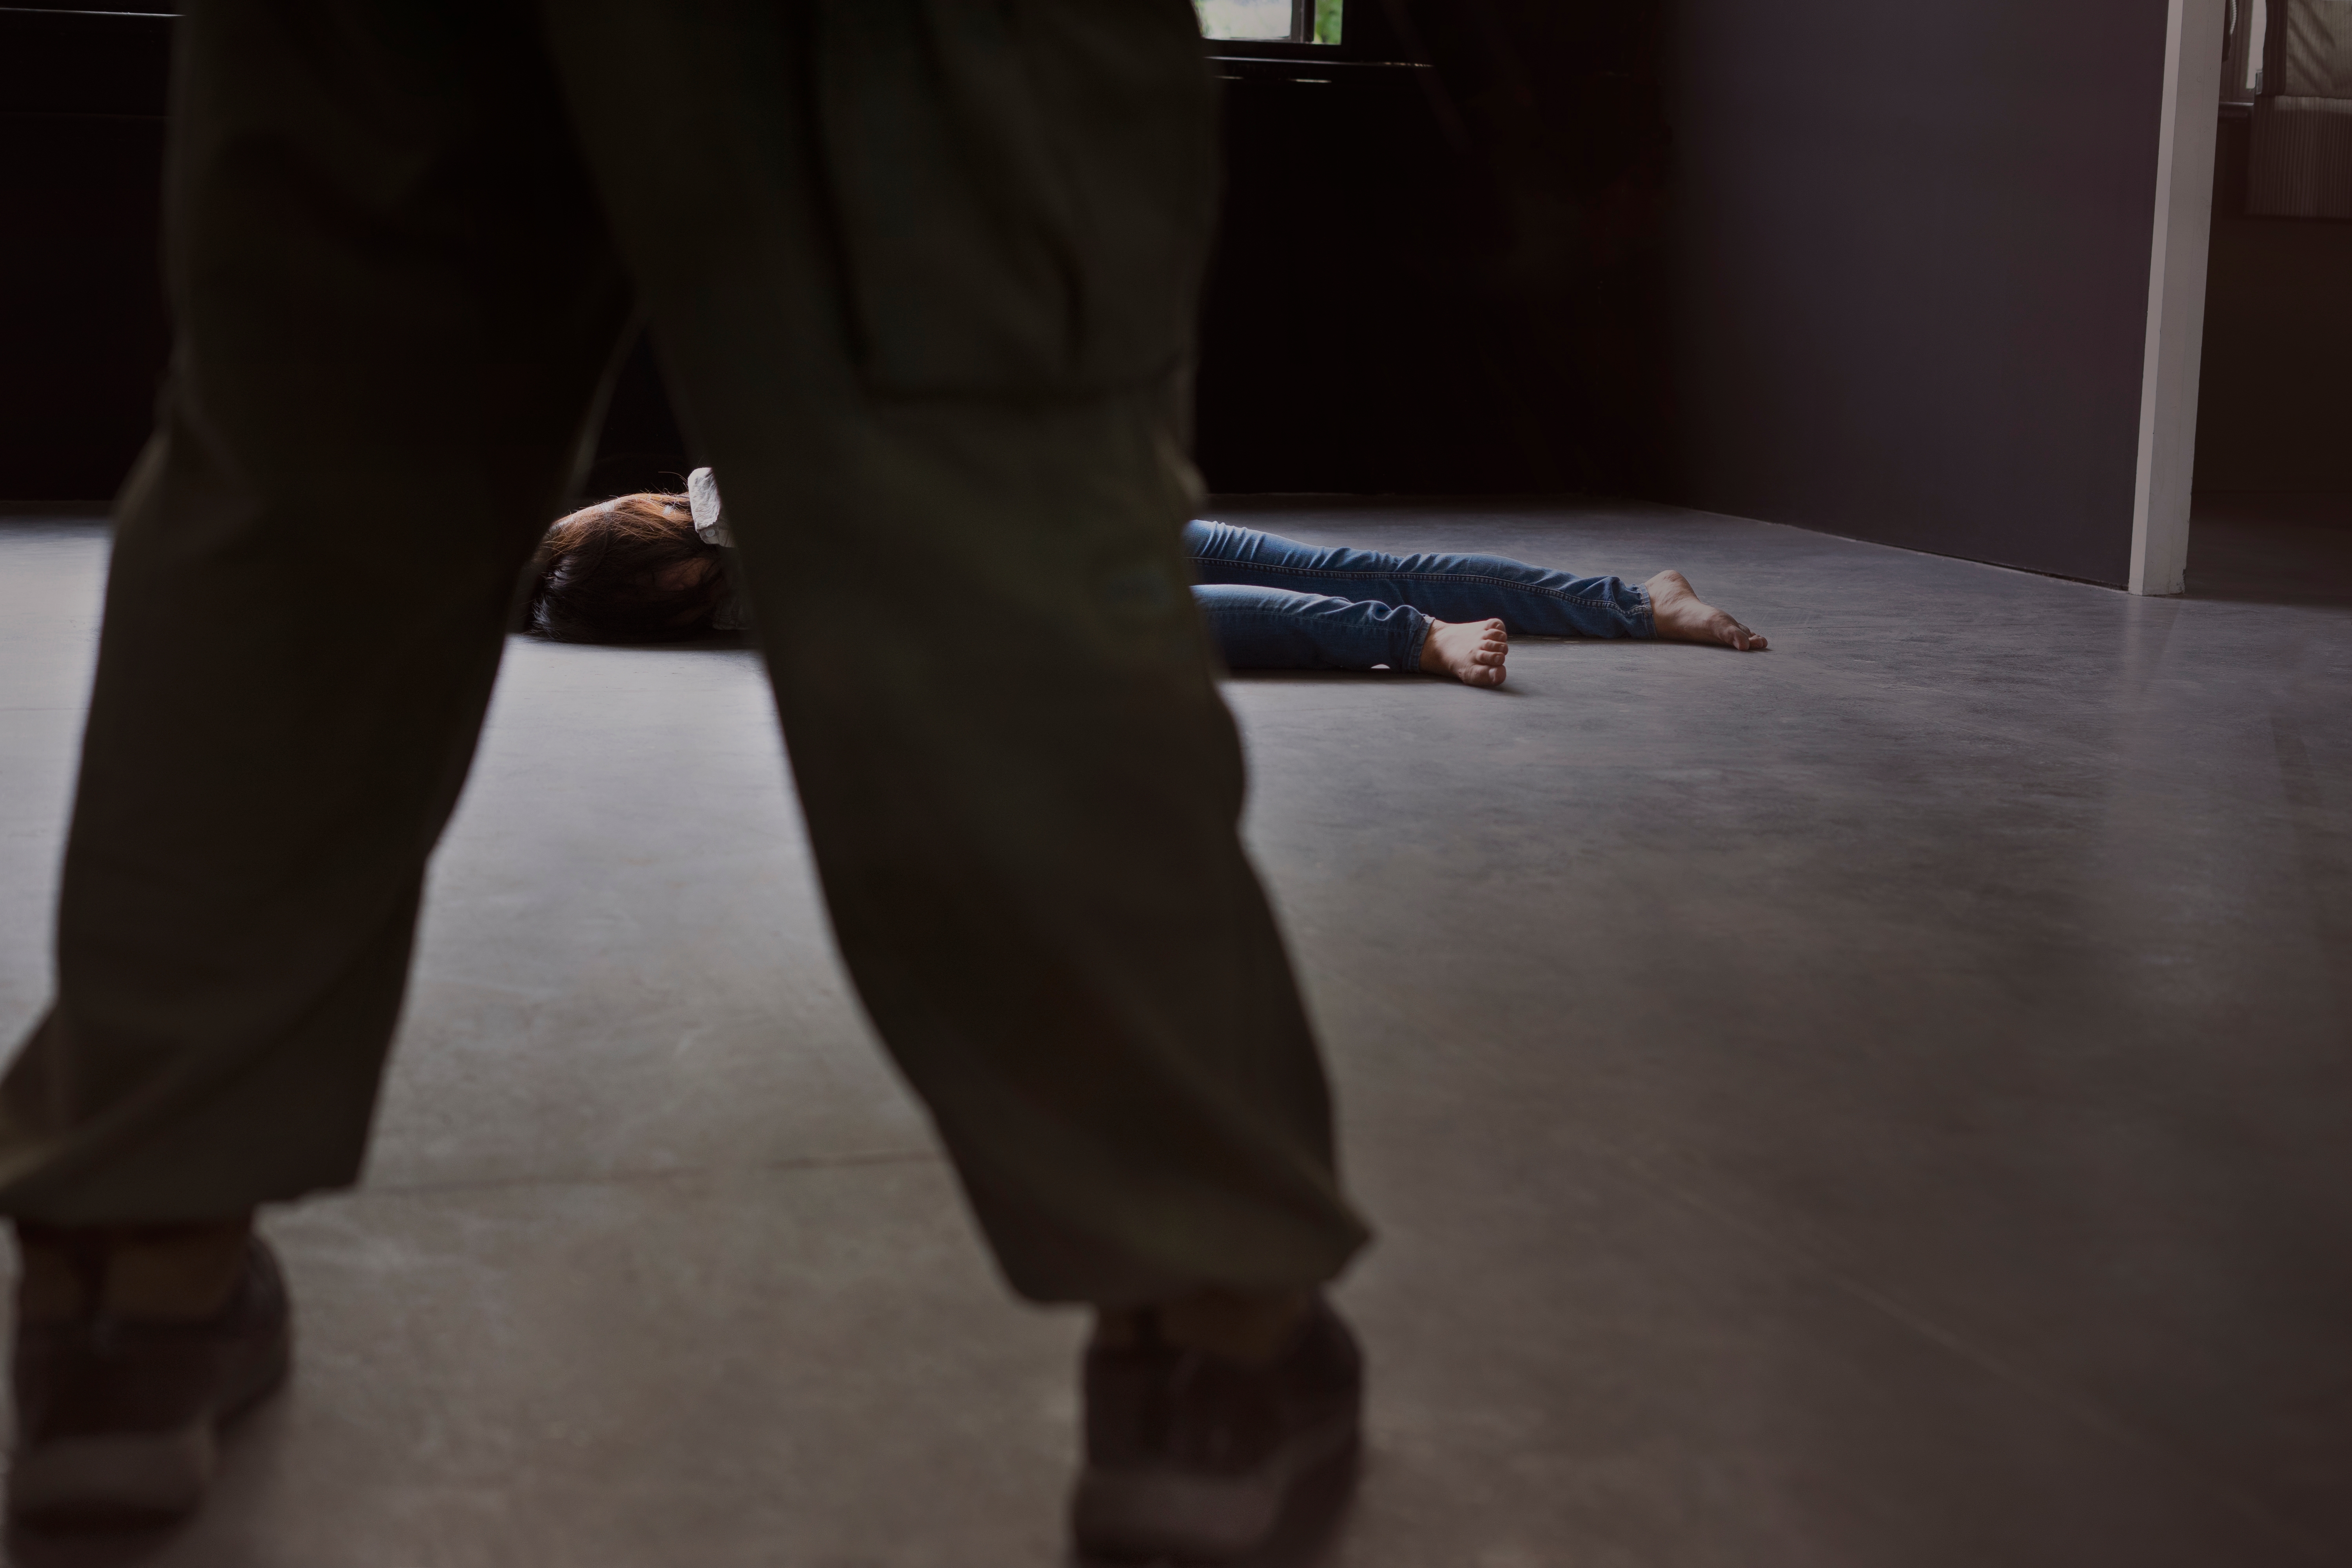 Unconscious woman on the ground | Source: Shutterstock.com